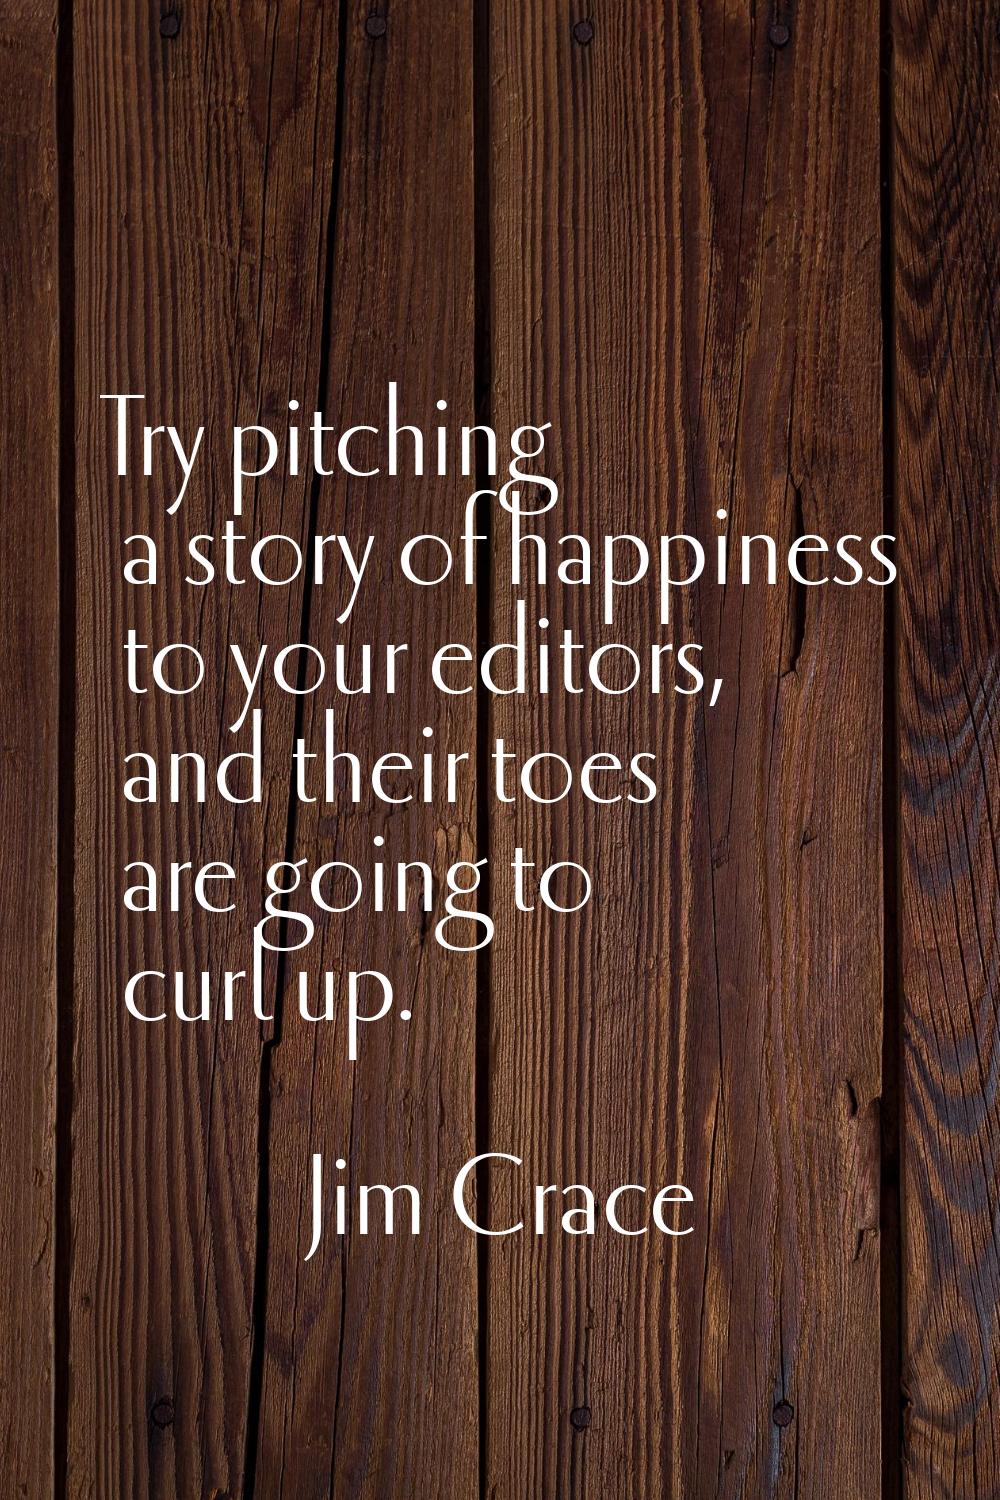 Try pitching a story of happiness to your editors, and their toes are going to curl up.